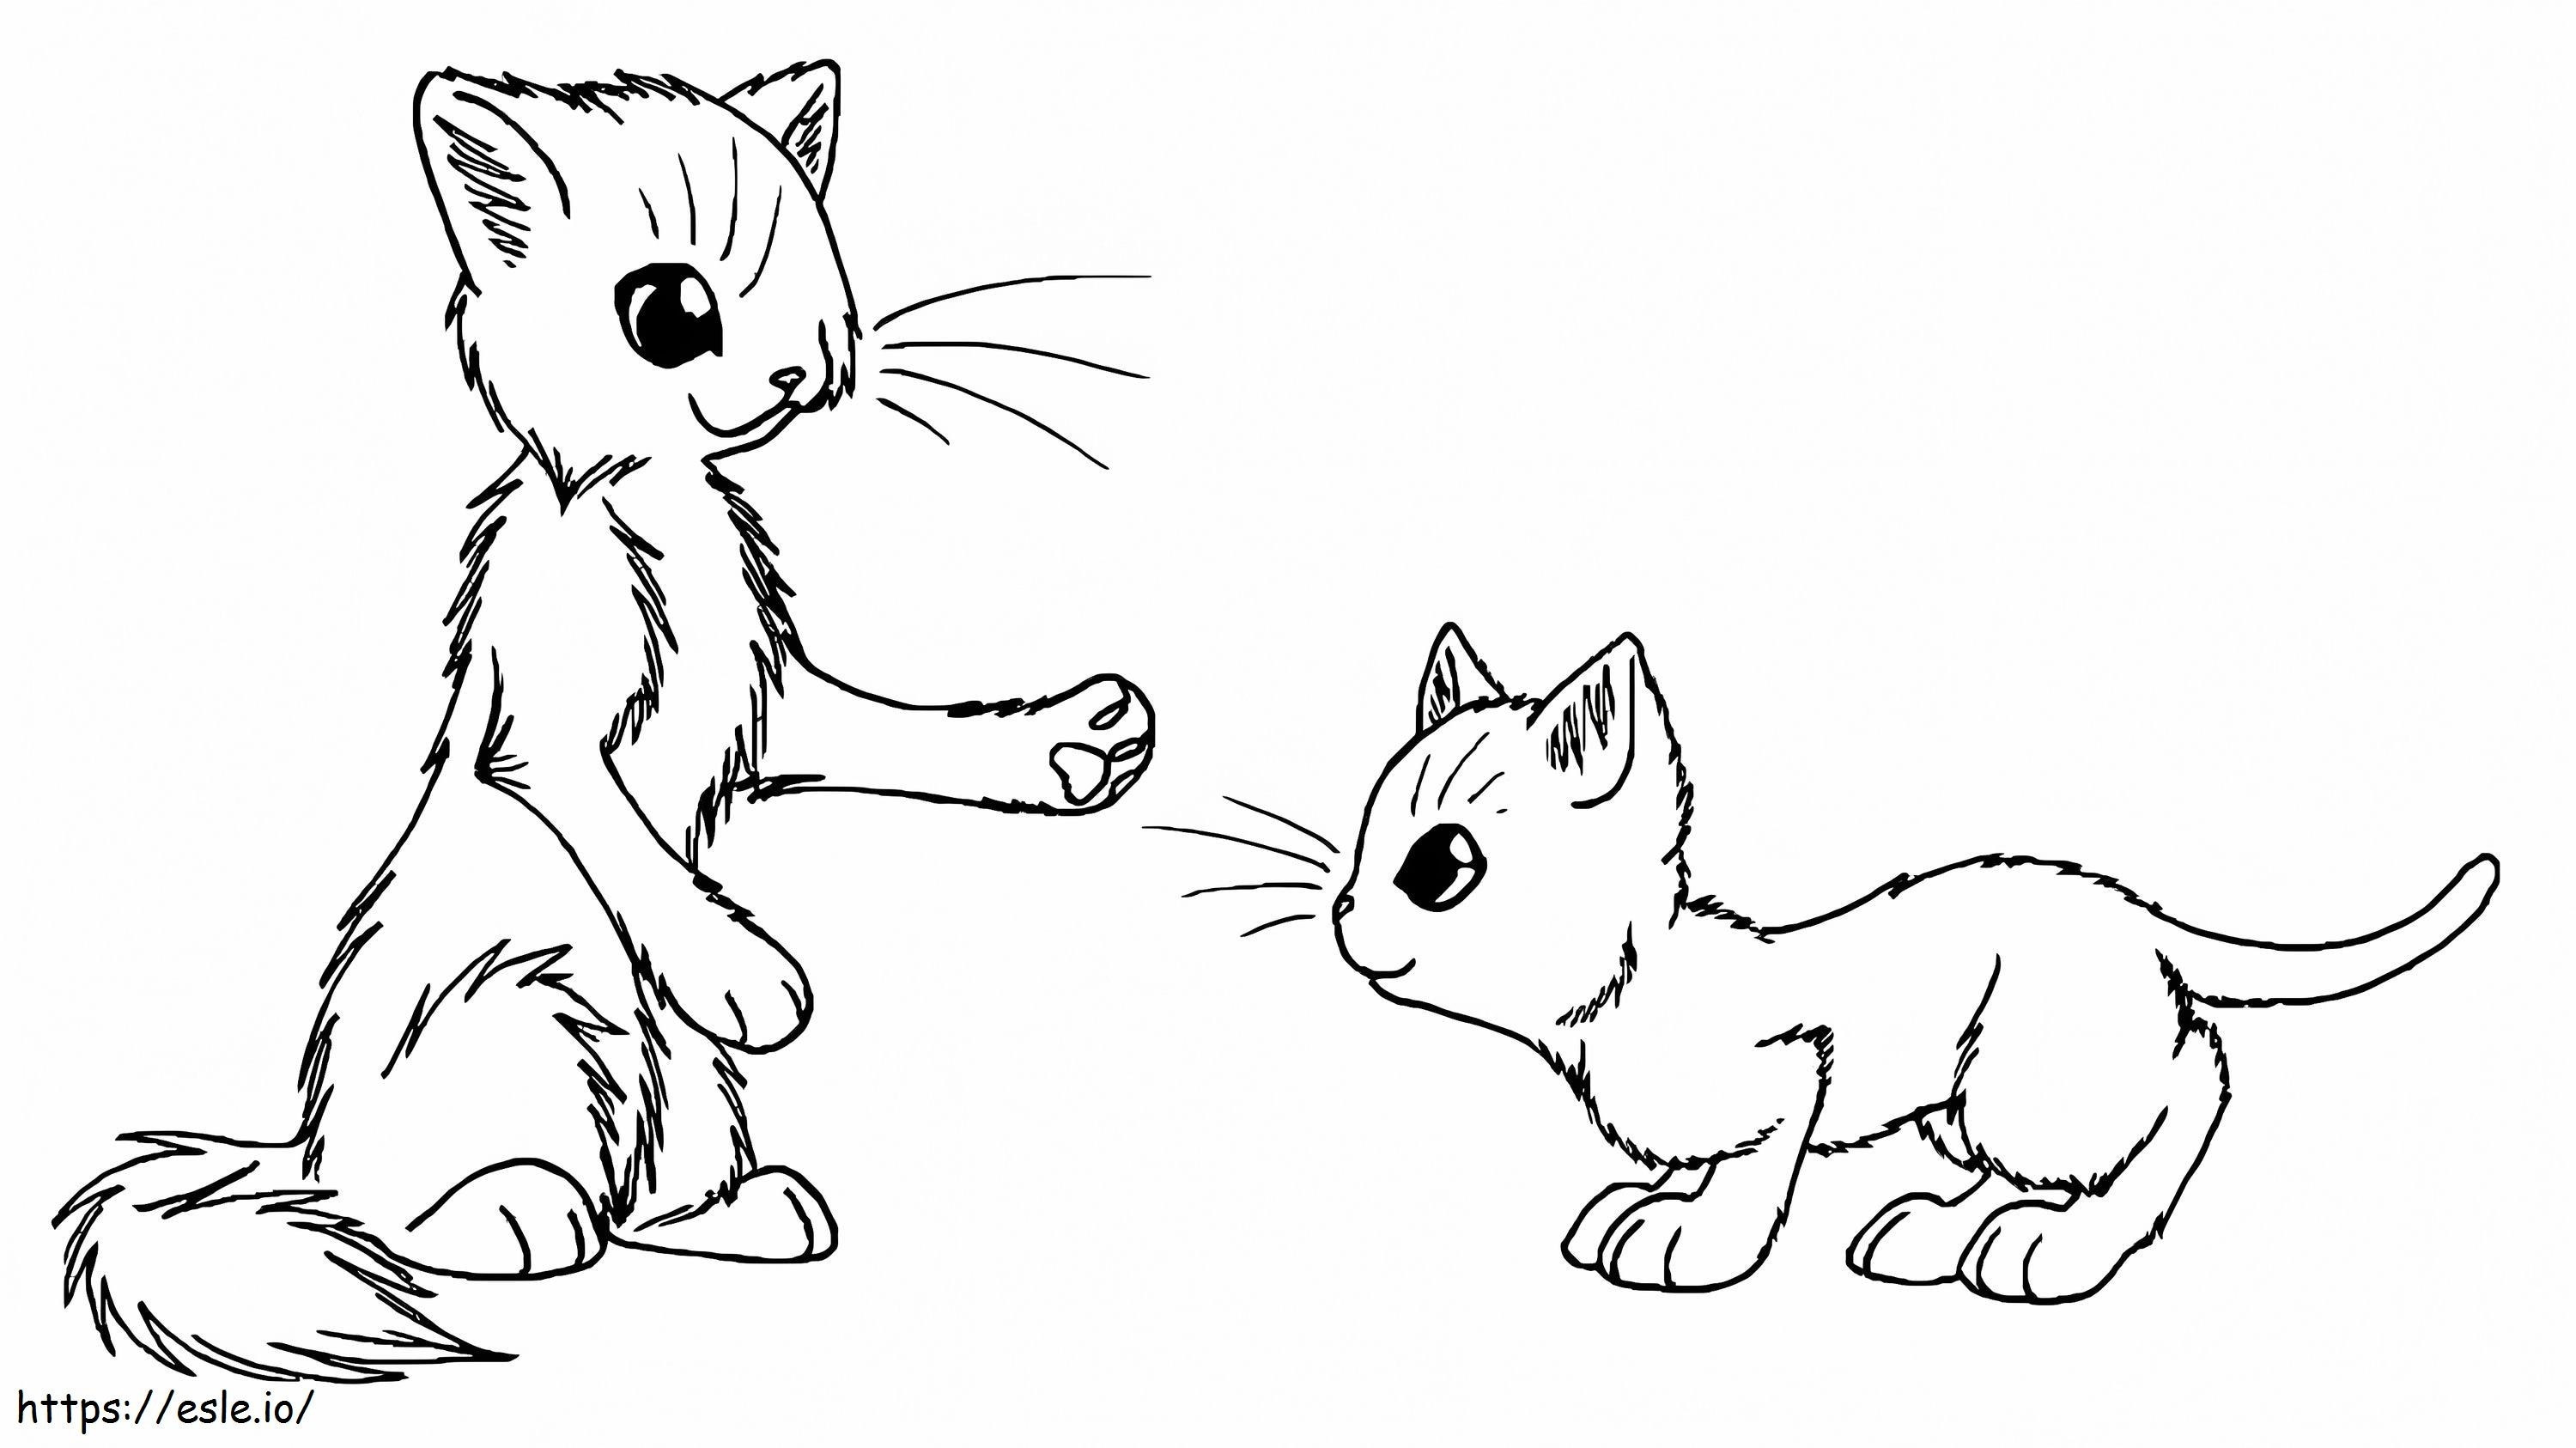 Two Little Warrior Cats coloring page